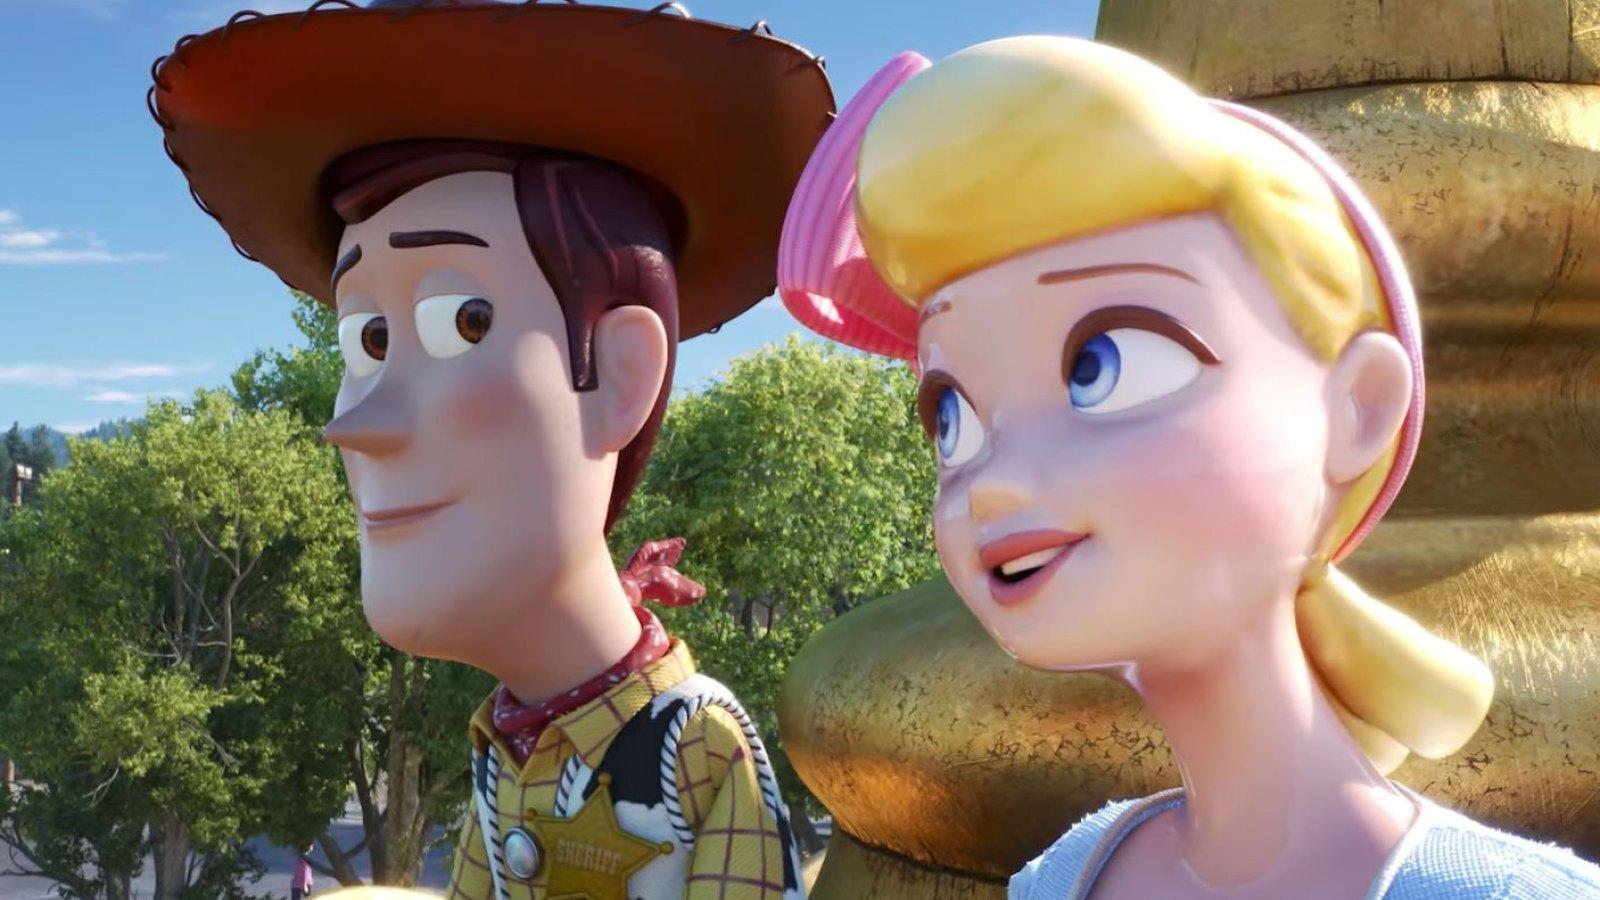 Toy Story 4' Shows Bo Peep Reunite with Buzz, Woody